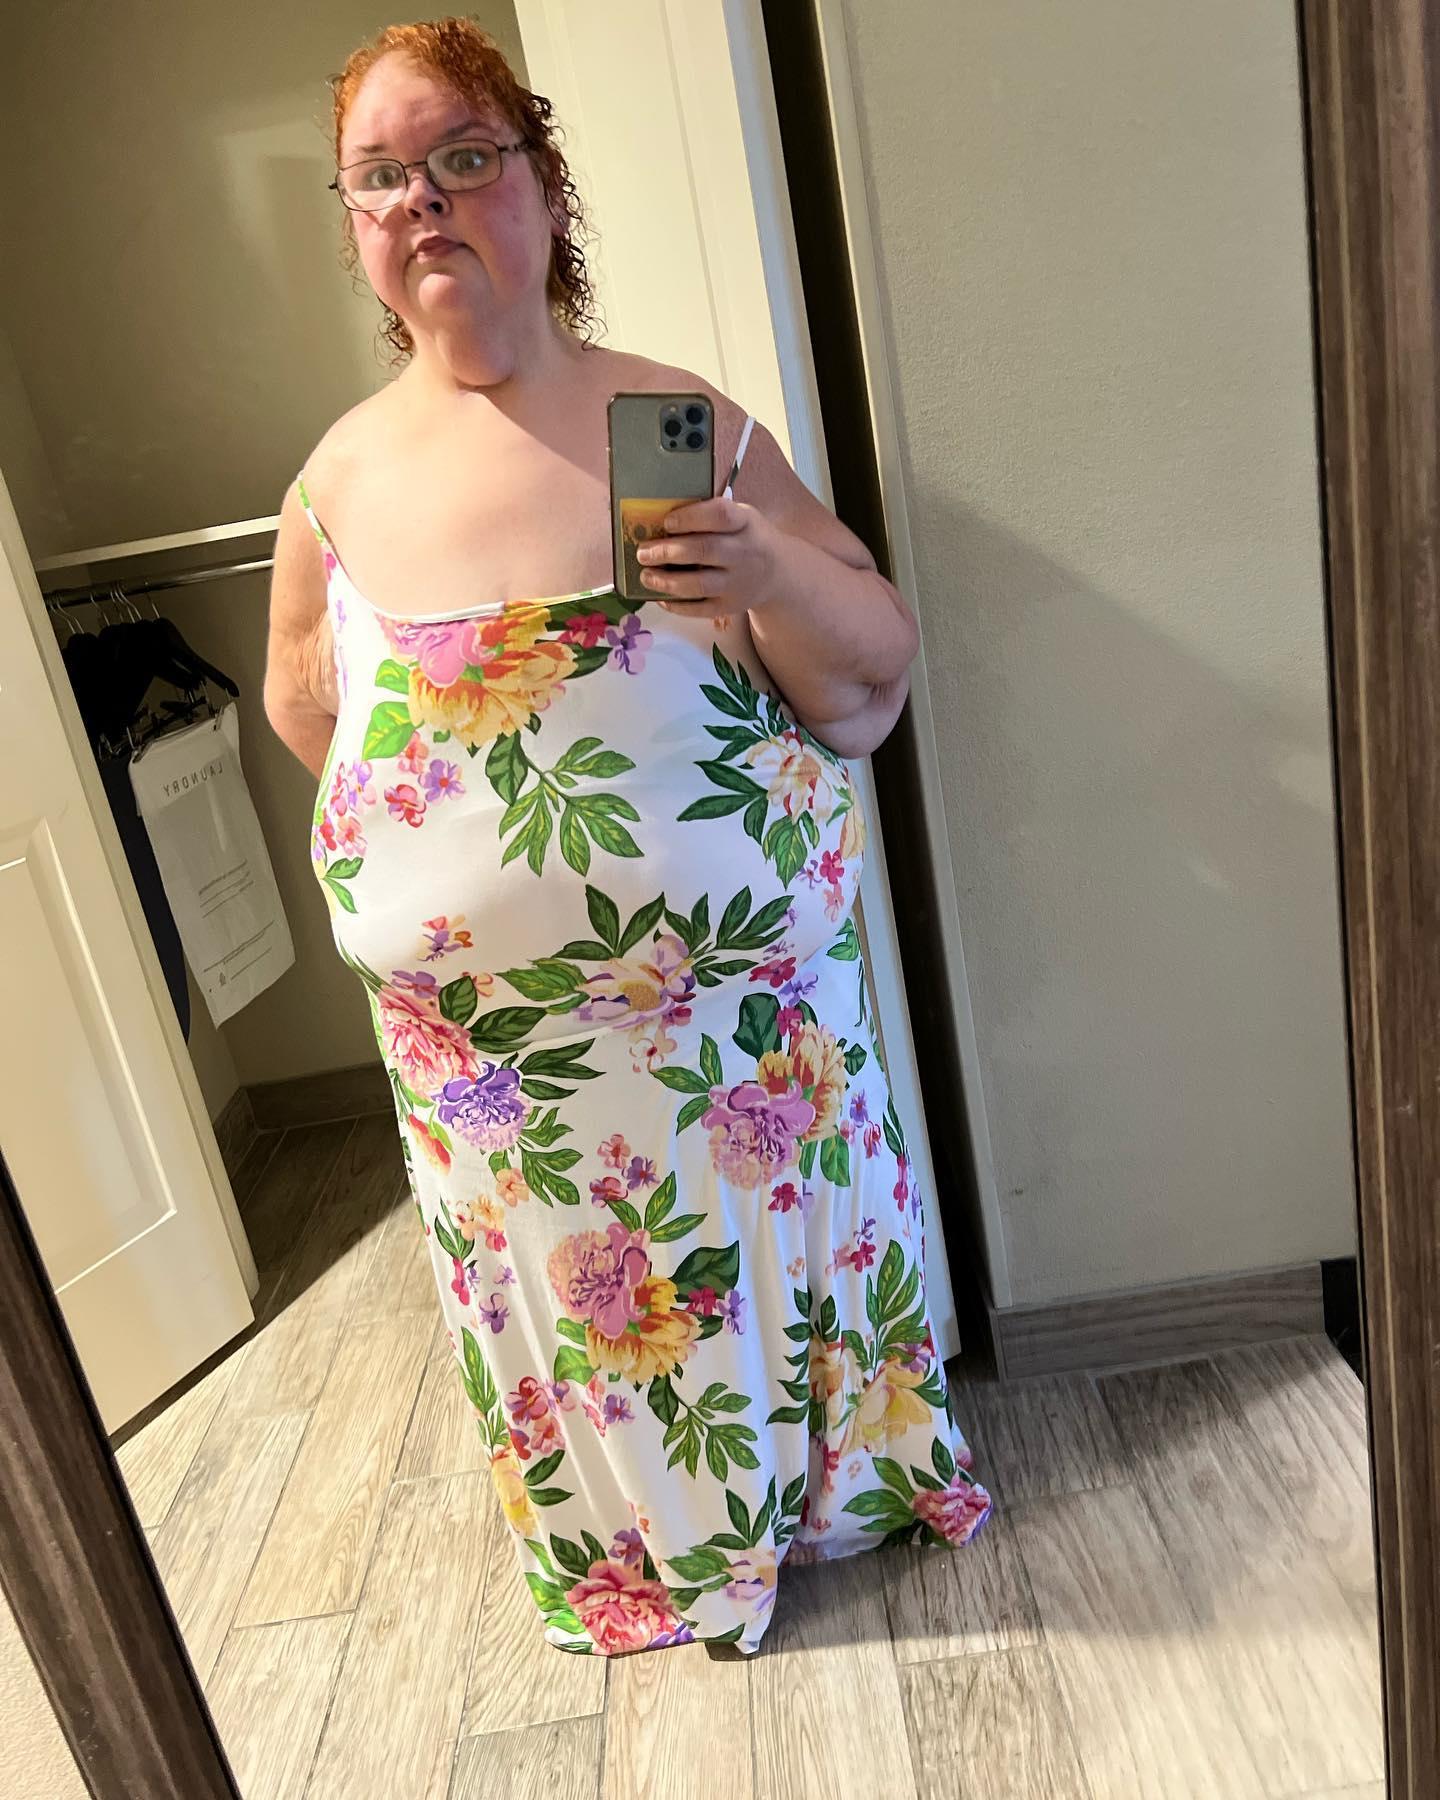 '1000-Lb. Sisters' Tammy Slaton Stuns Fans With New Mirror Selfie Flaunting Her Shocking Weigh Loss